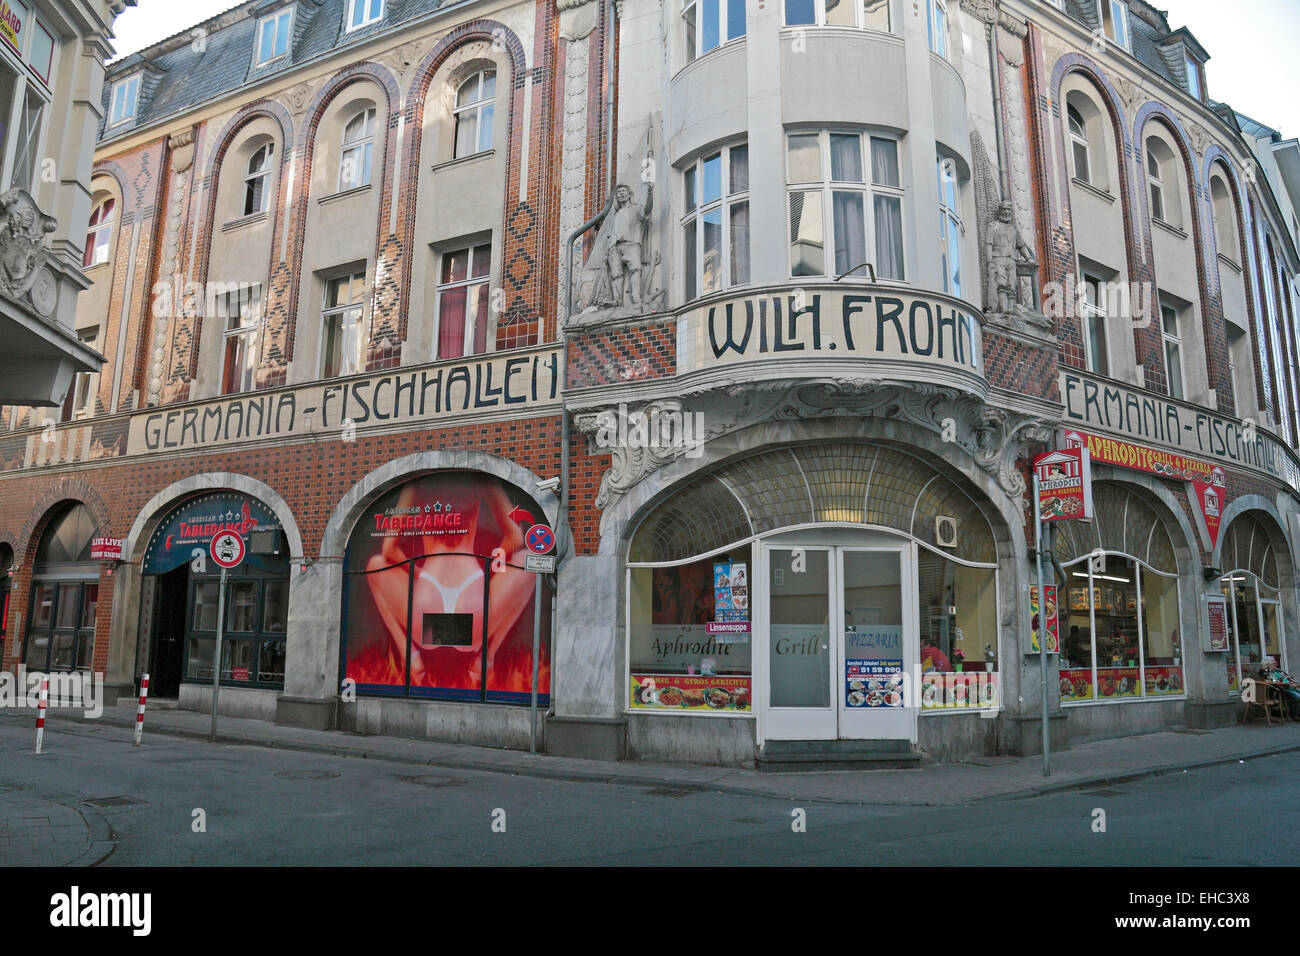 The historic shop front of the Germania-Fischhallen Wilh. Frohn (German fish halls) shop in Aachen, Germany. Stock Photo